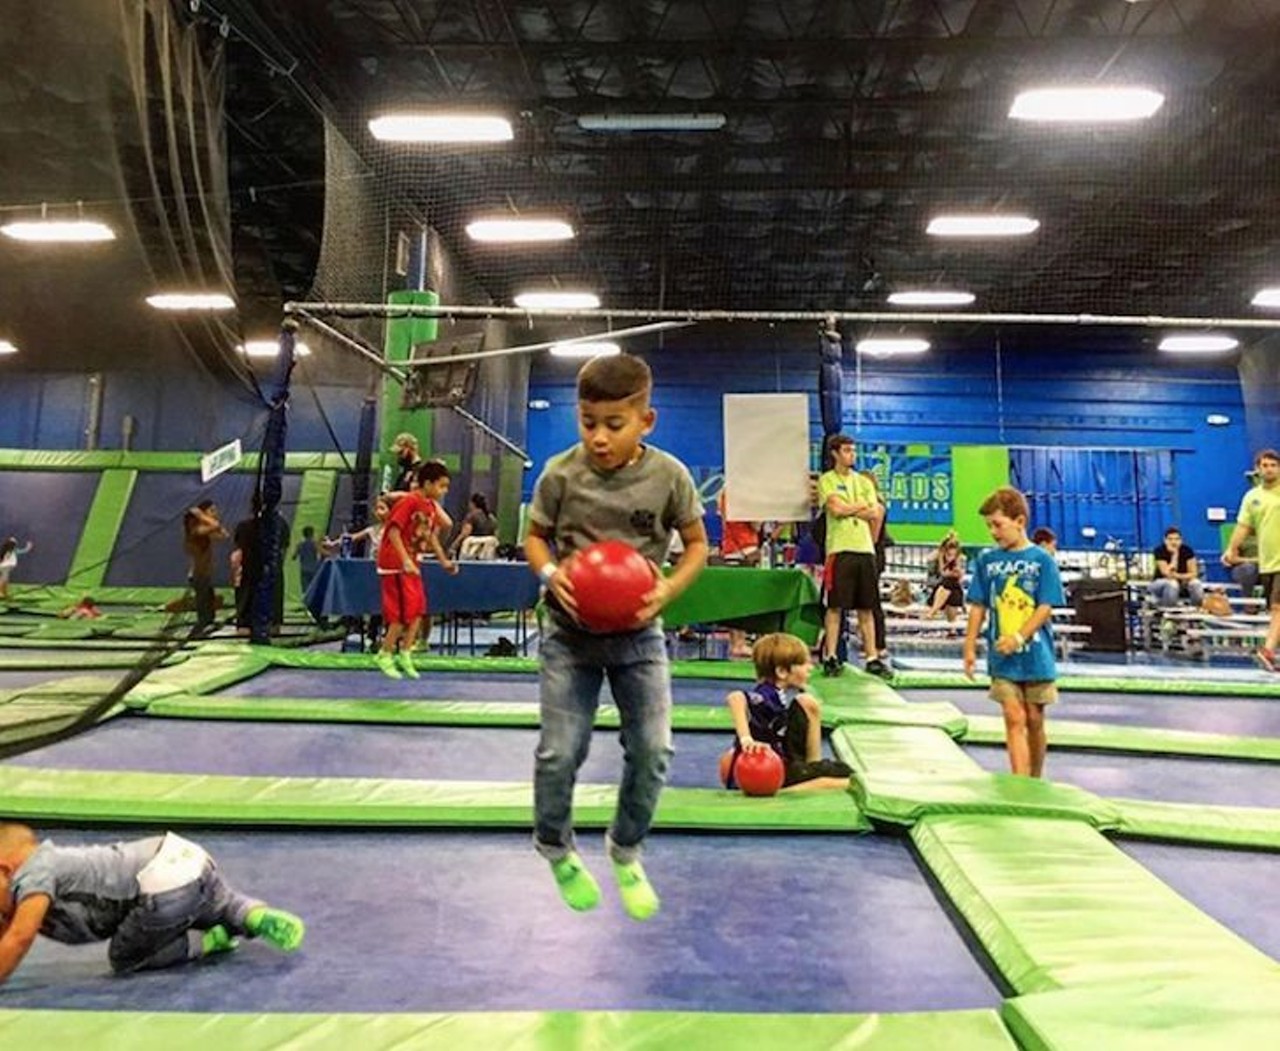 AirHeads Trampoline Arena Orlando  
33 W Pineloch Ave, 407-477-6753
Let out your inner child, while avoiding other tourist trap location. They have activities like dodgeball or basketball on trampolines Plus it&#146;s a crazy workout.
Photo via mena0910 / Instagram